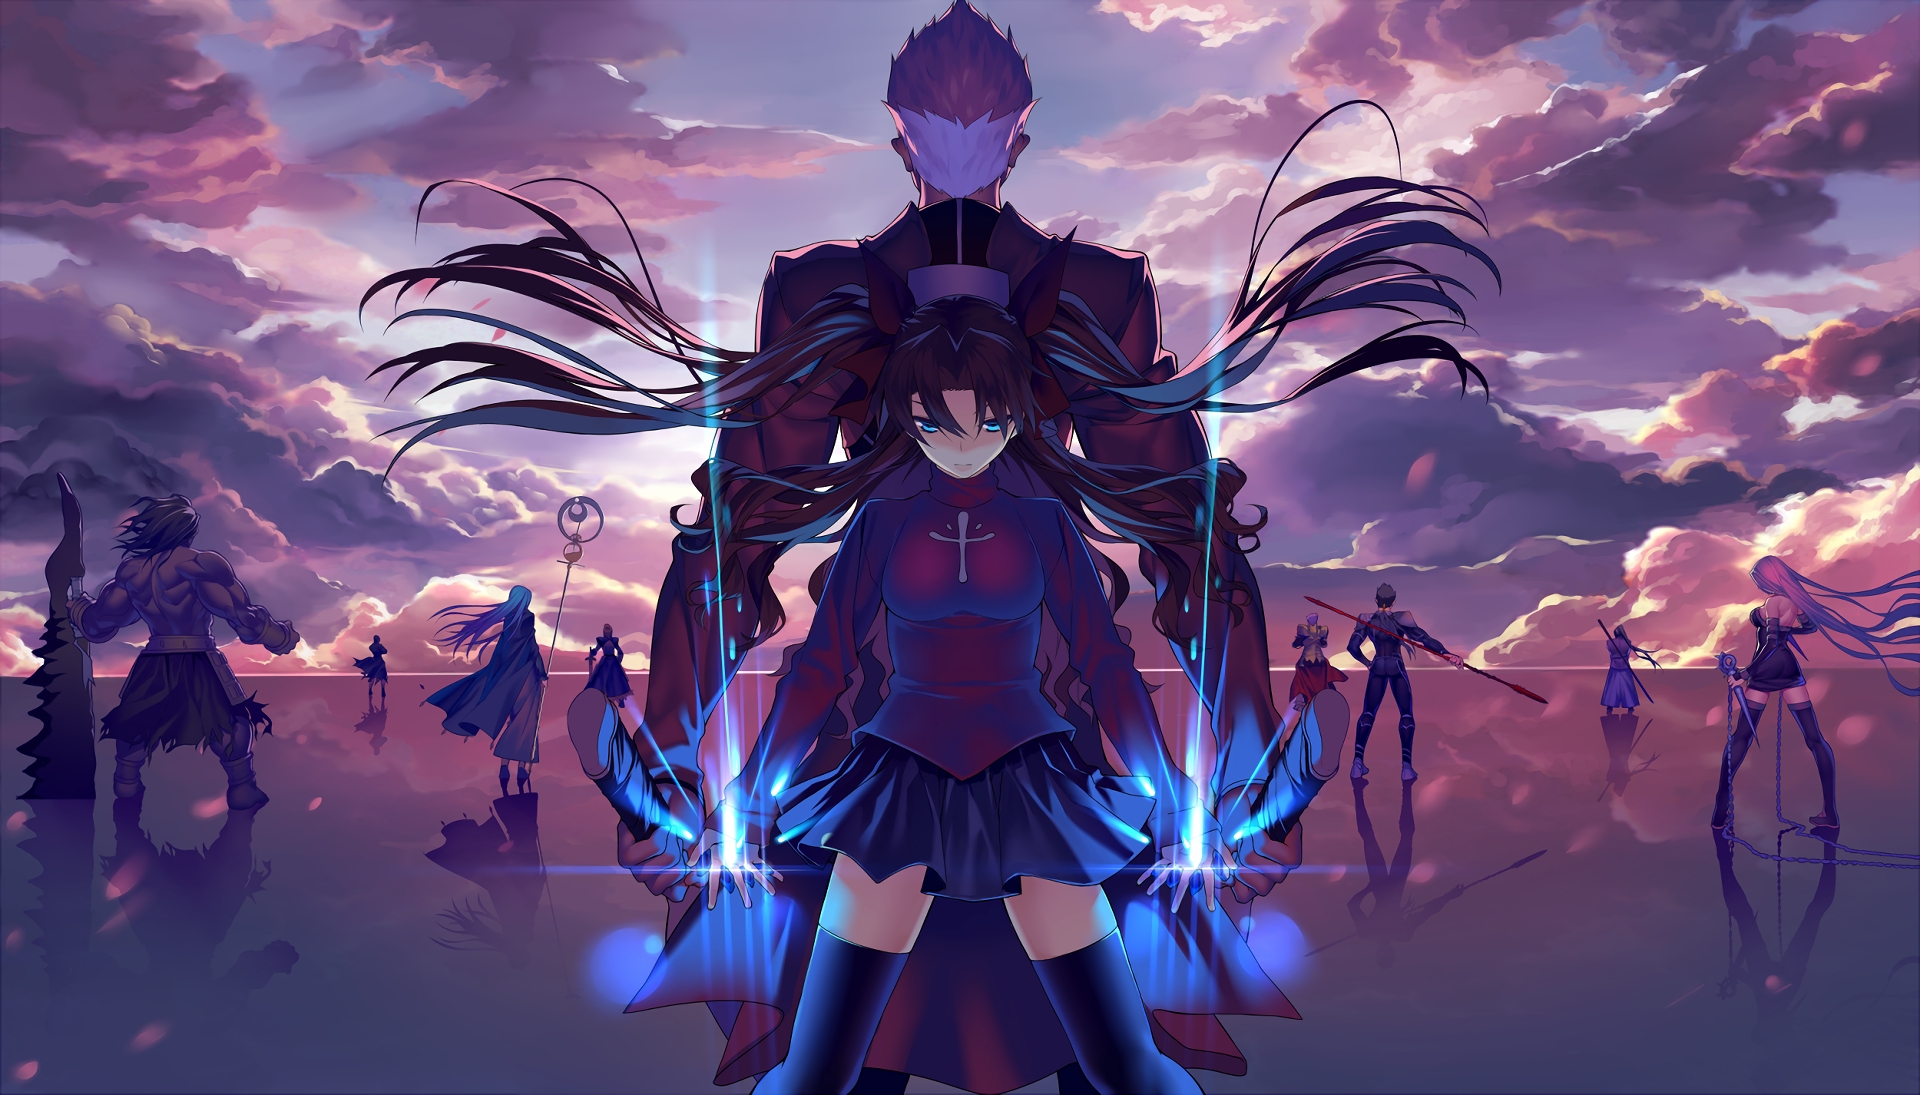 10 Best Fate/stay Night Unlimited Blade Works Wallpaper FULL HD 1080p For PC Desktop